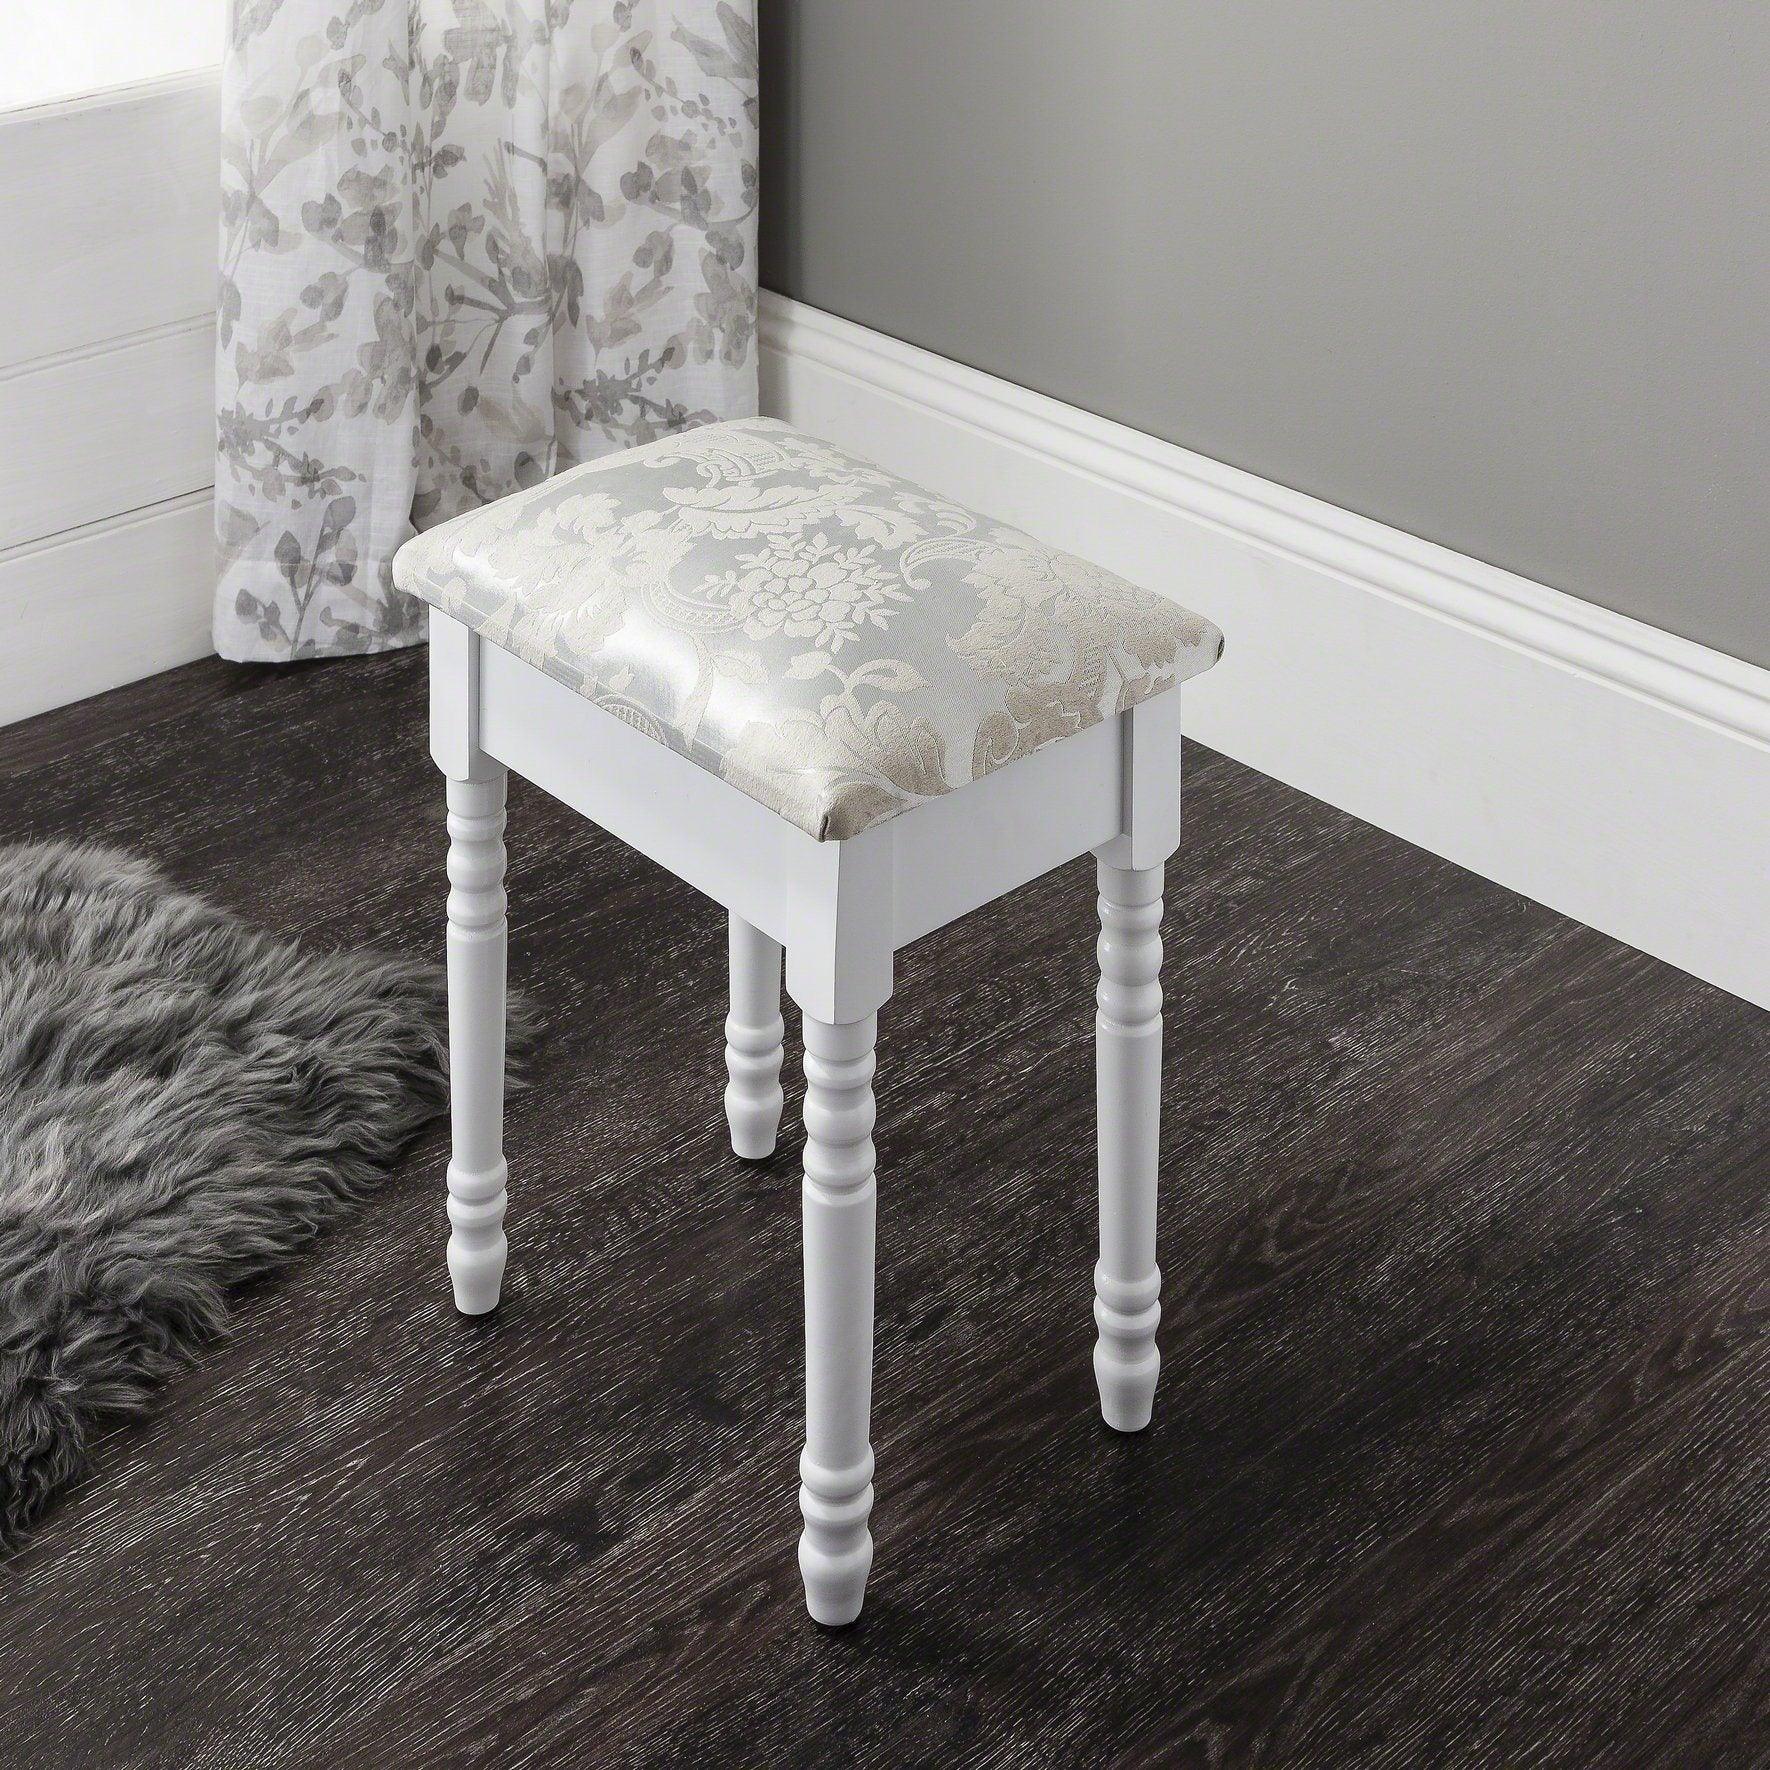 Sienna Dressing Table, Stool & Mirror Set - White Painted - In Stock Date - 2nd June 2020 - Laura James